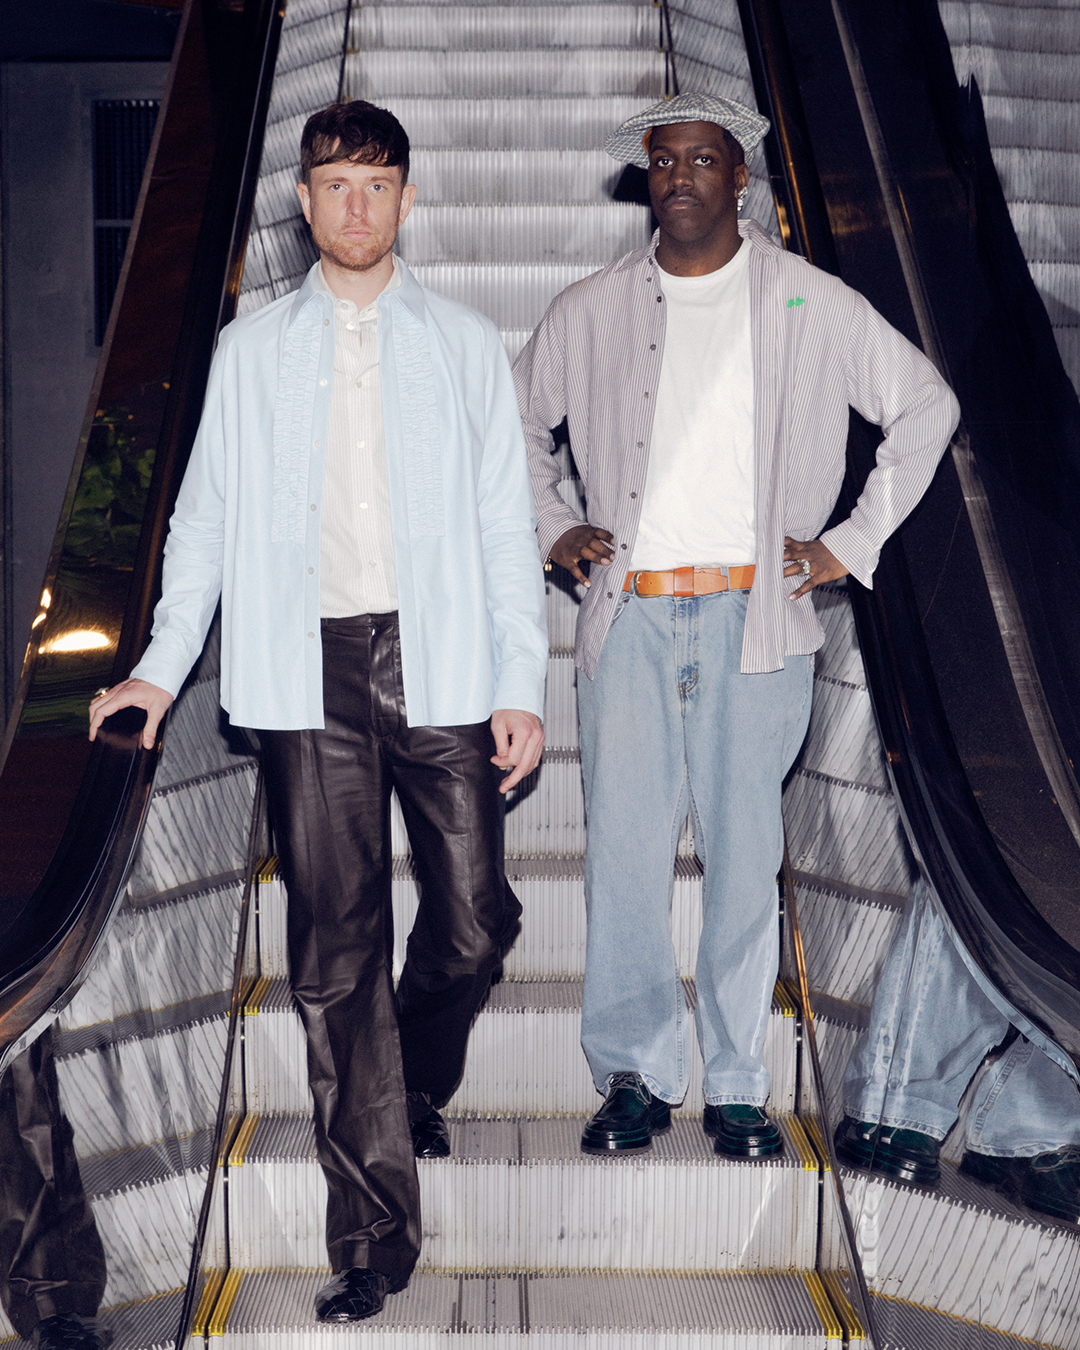 James Blake in a light shirt and leather pants stands next to Lil Yachty in casual attire on an escalator